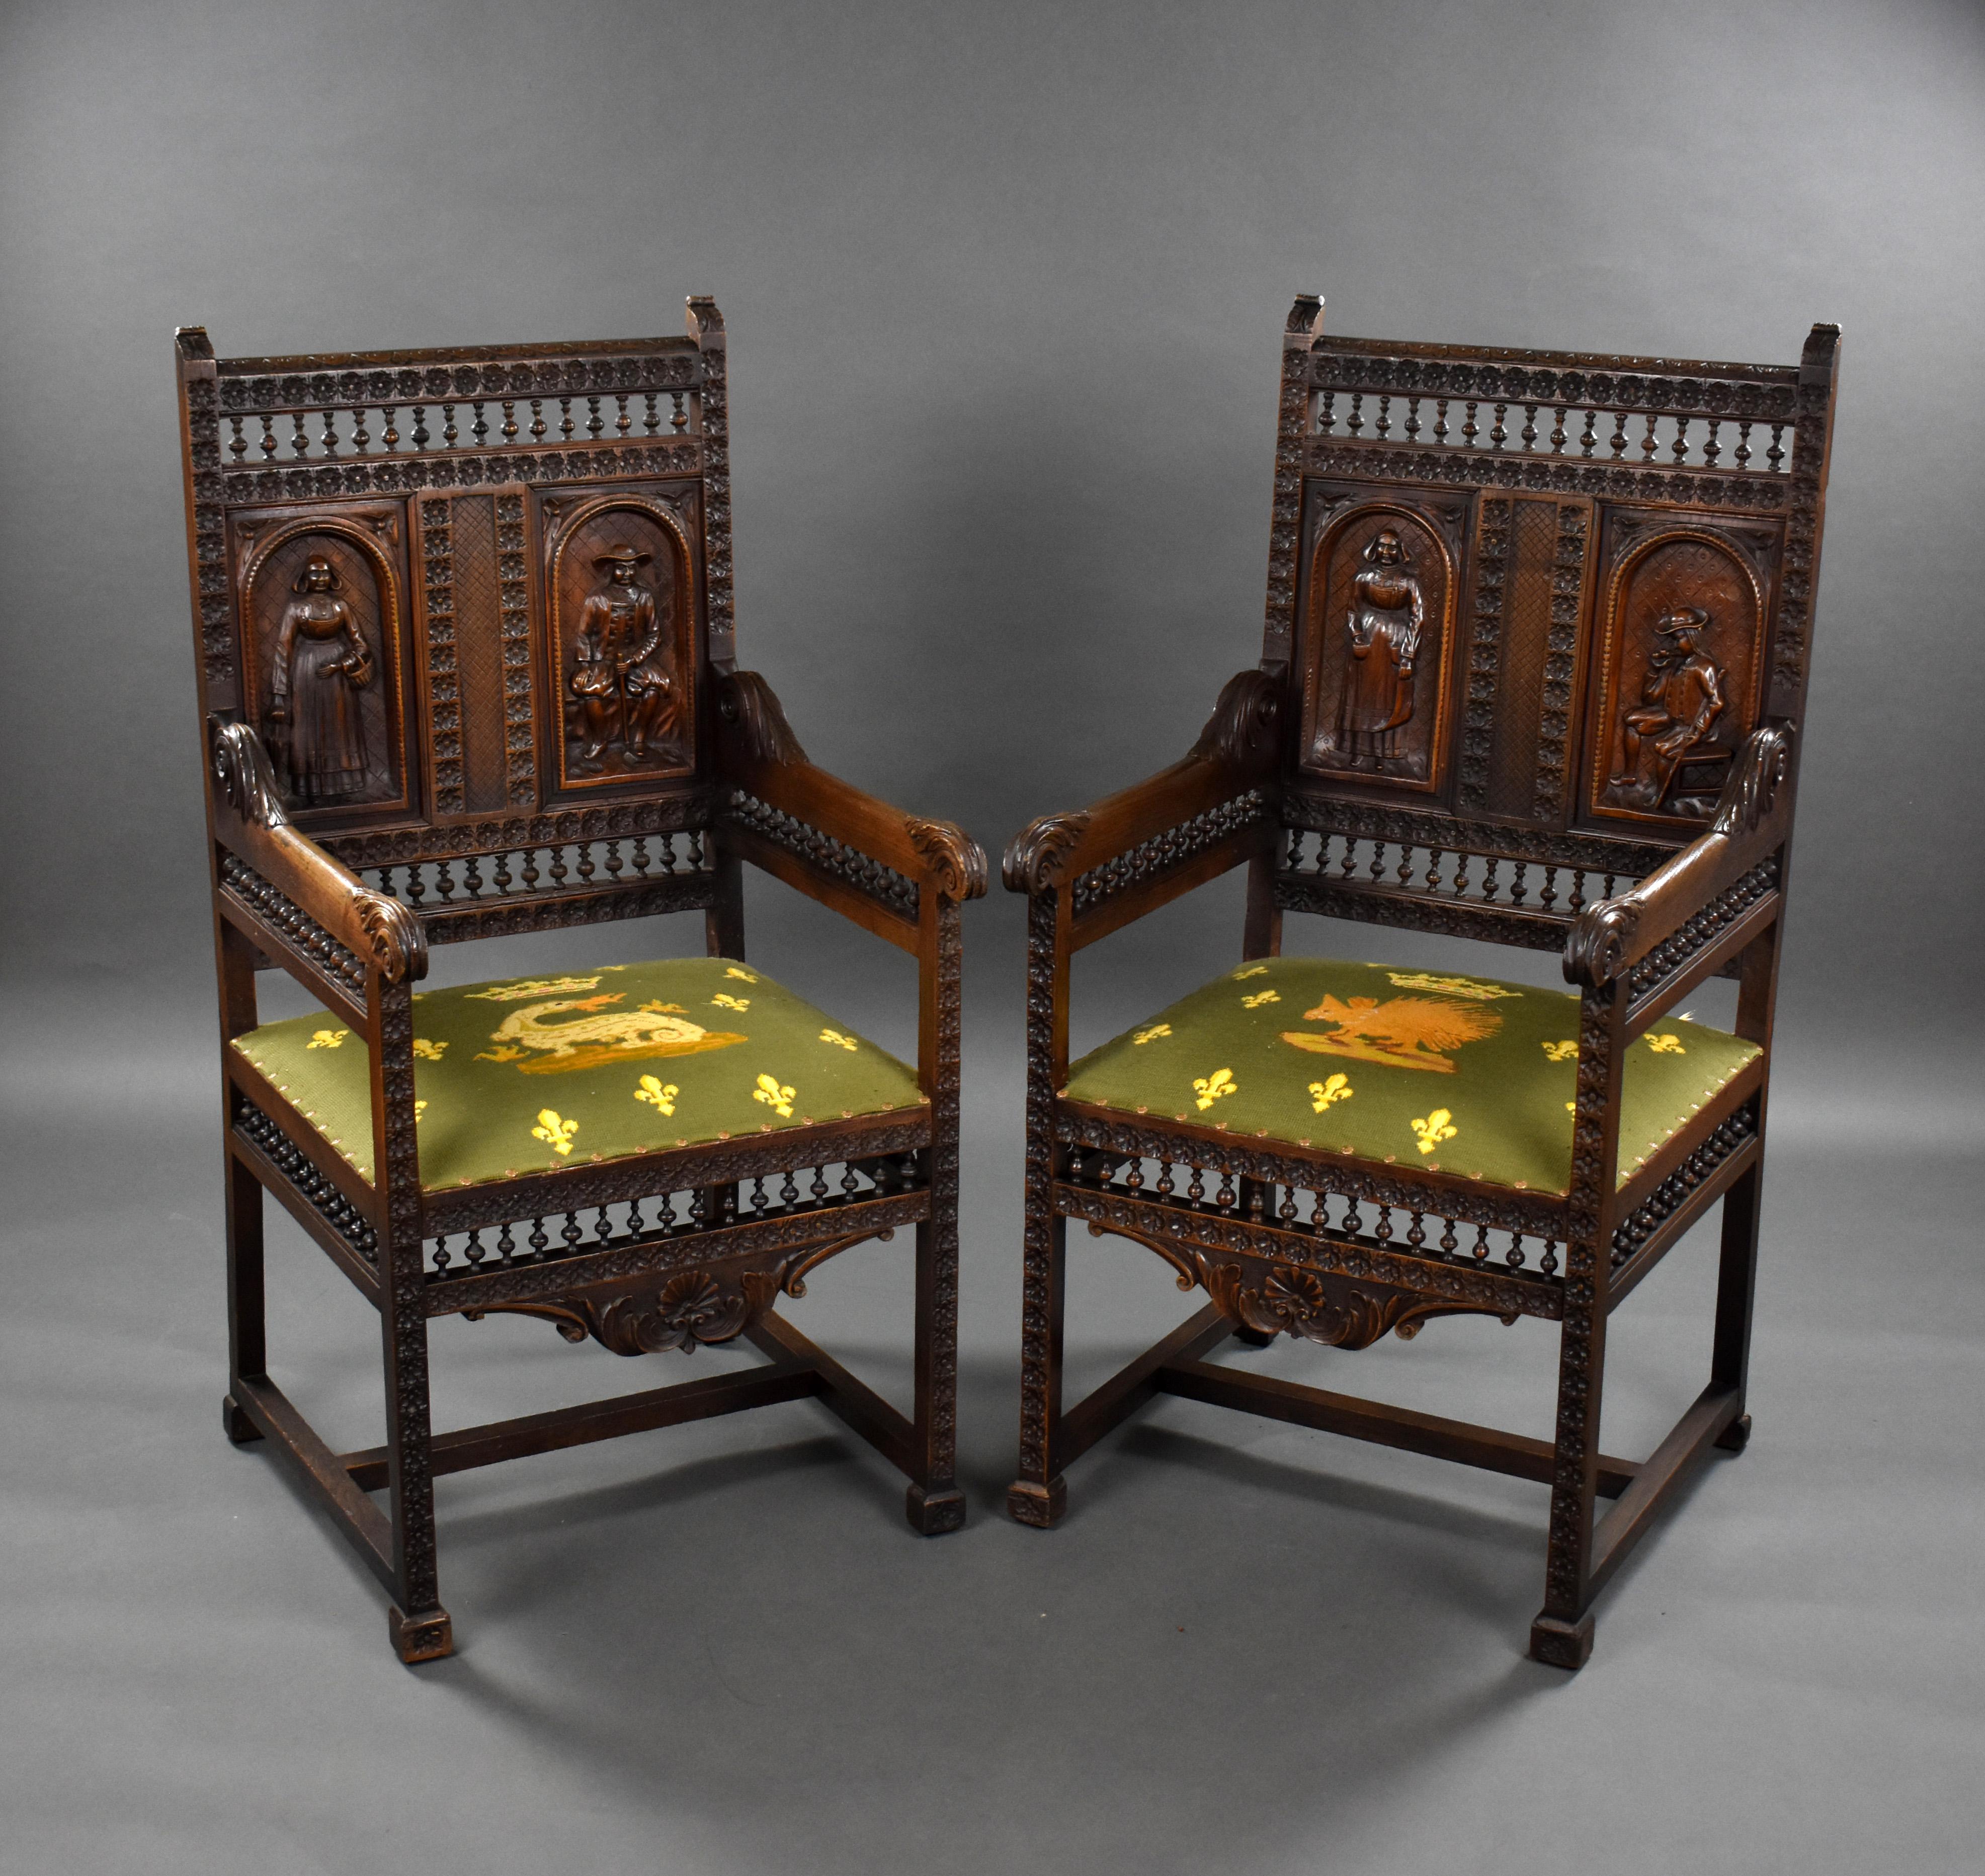 For sale is a good quality Set of 4 Belgian carved oak chairs, each ornately carved and having embroidered seats. All of the chairs are structurally sound and remain in good condition for their age. 

Measures: Carvers = Width: 56cm Depth: 53cm